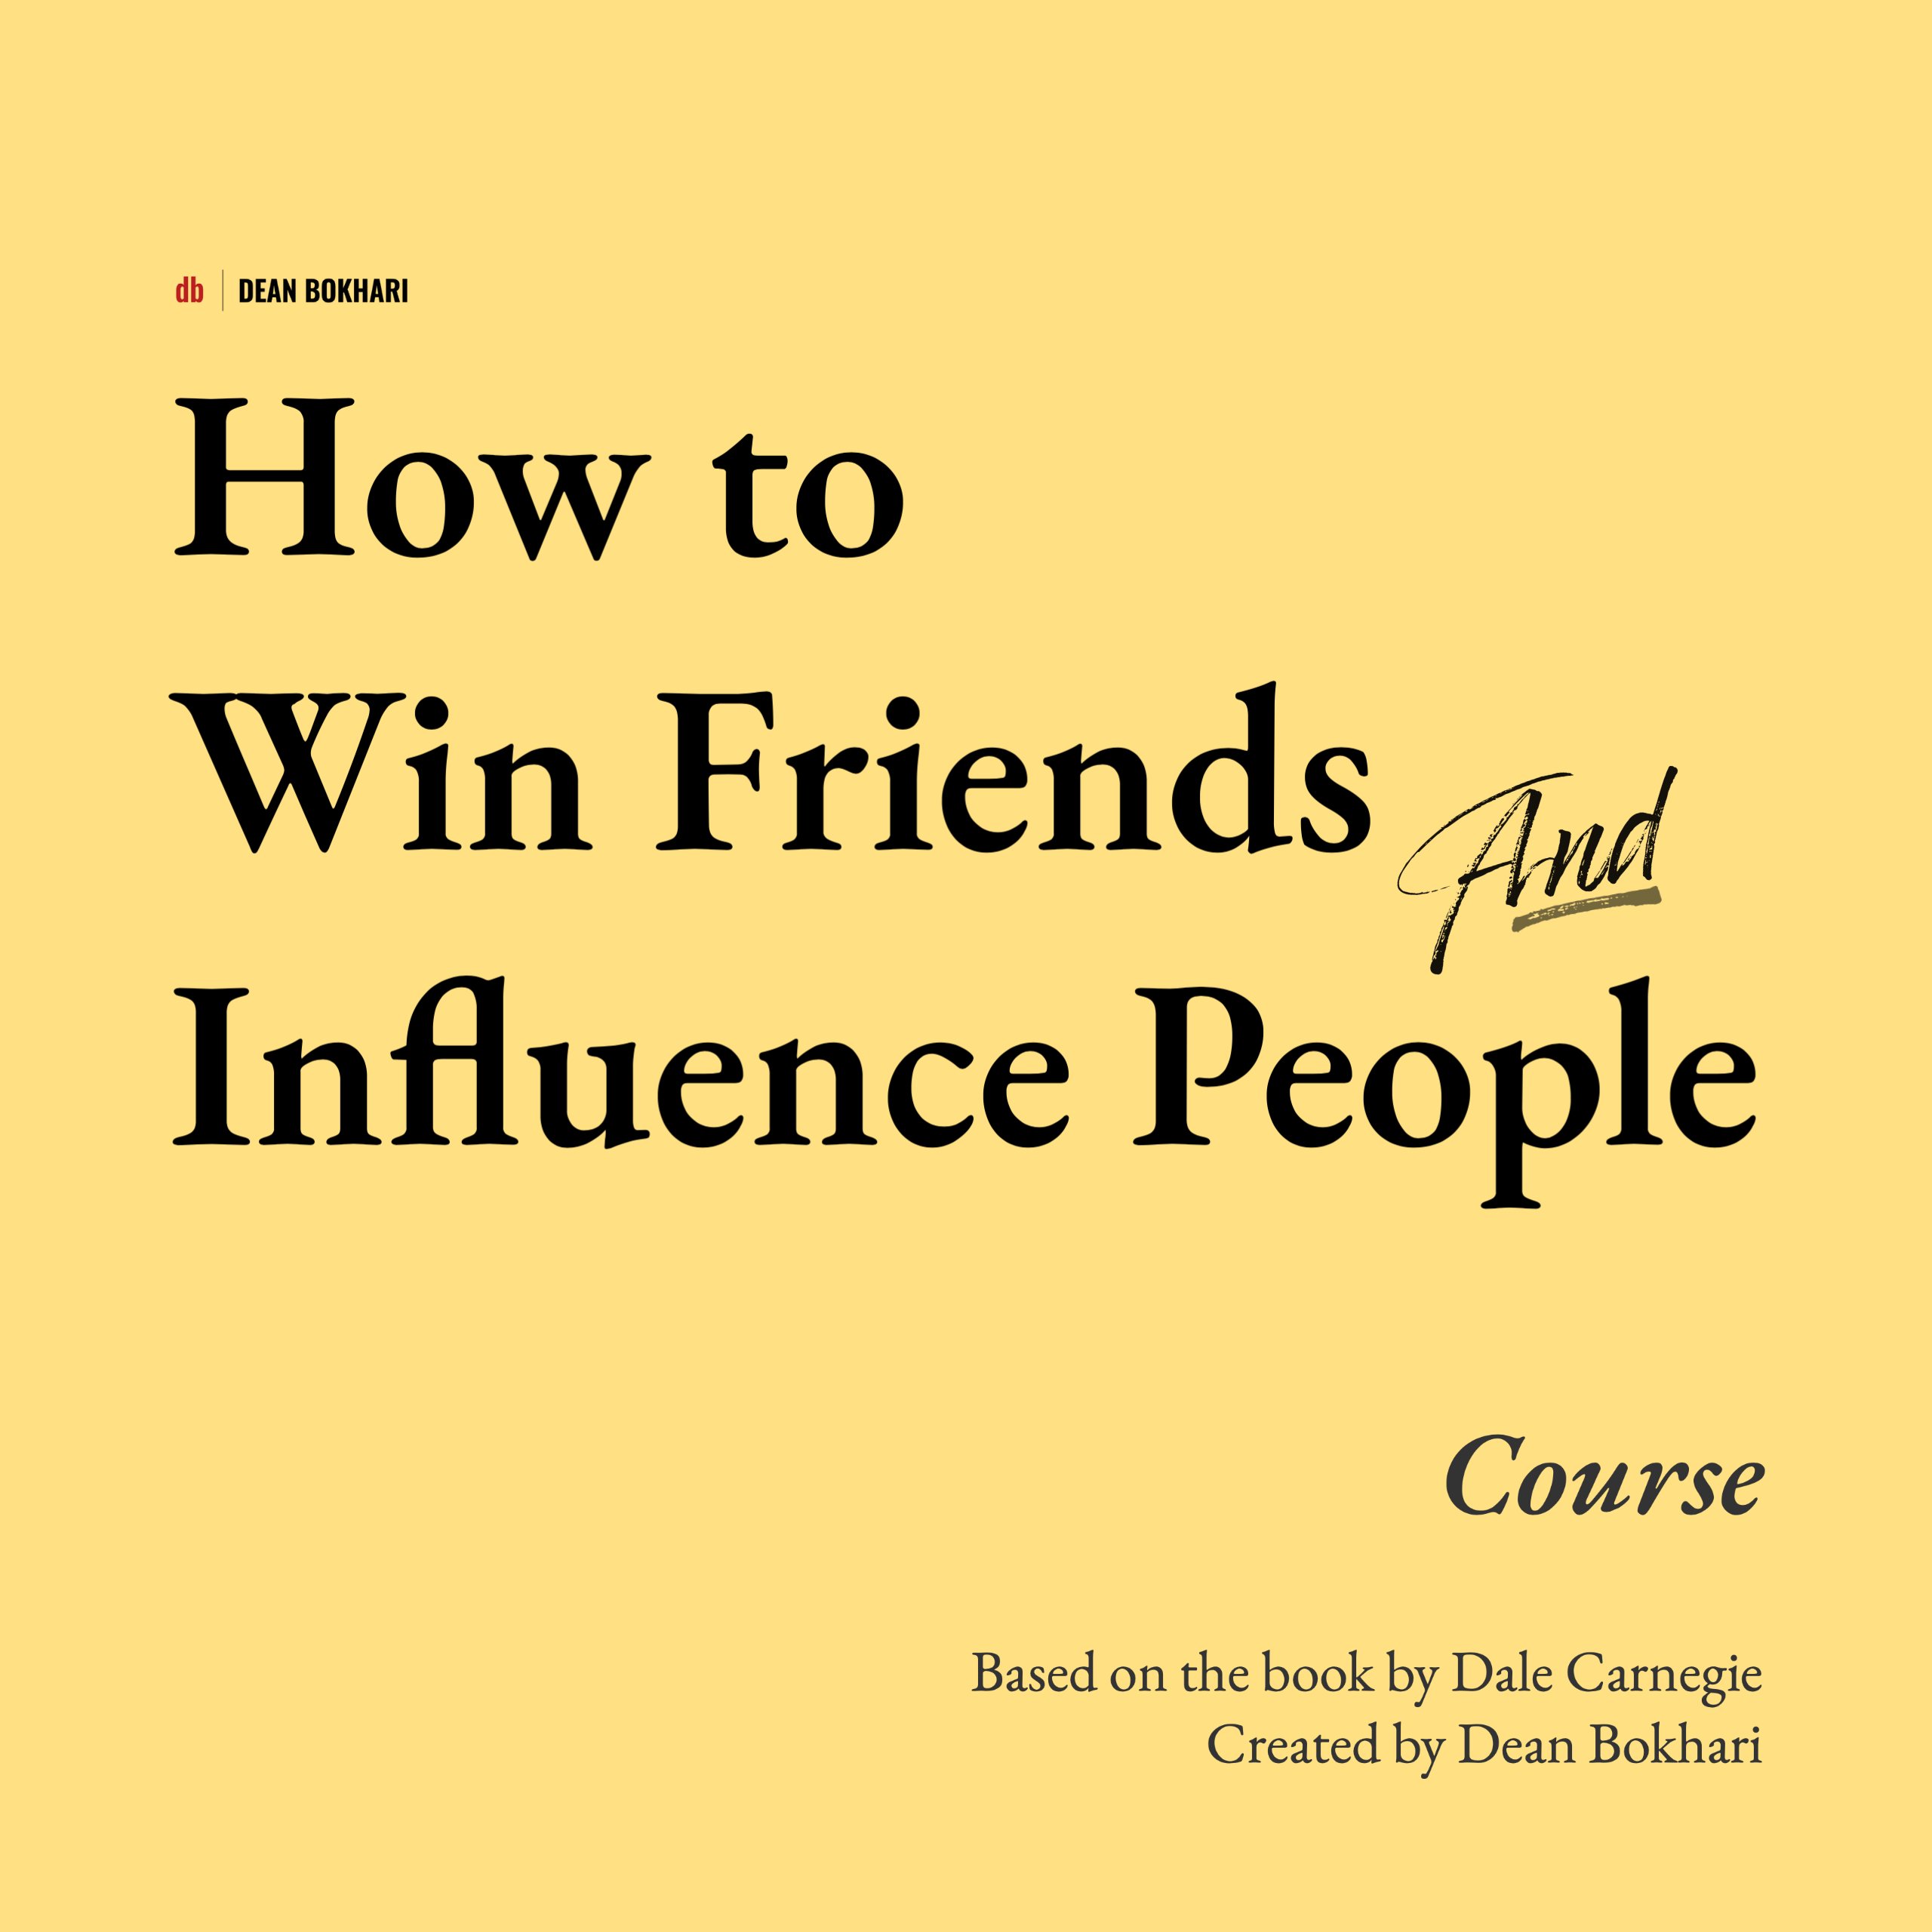 Cover_for_How_to_Win_Friends_and_Influence_People_Course_by_Dean_Bokhari